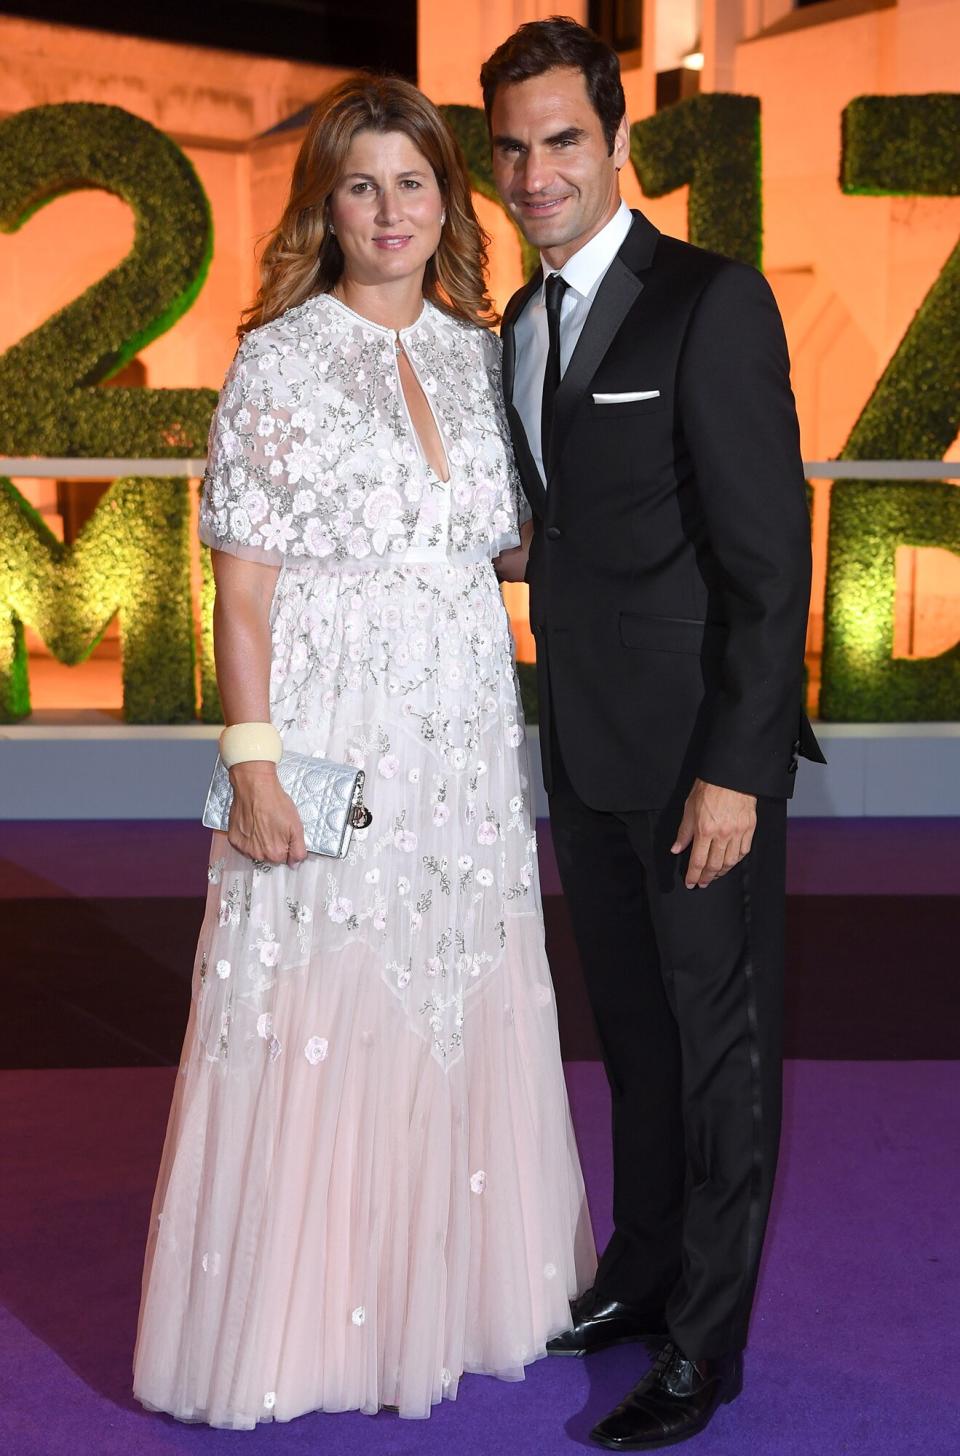 Roger Federer and wife Mirka attend the Wimbledon Winners Dinner at The Guildhall on July 16, 2017 in London, England